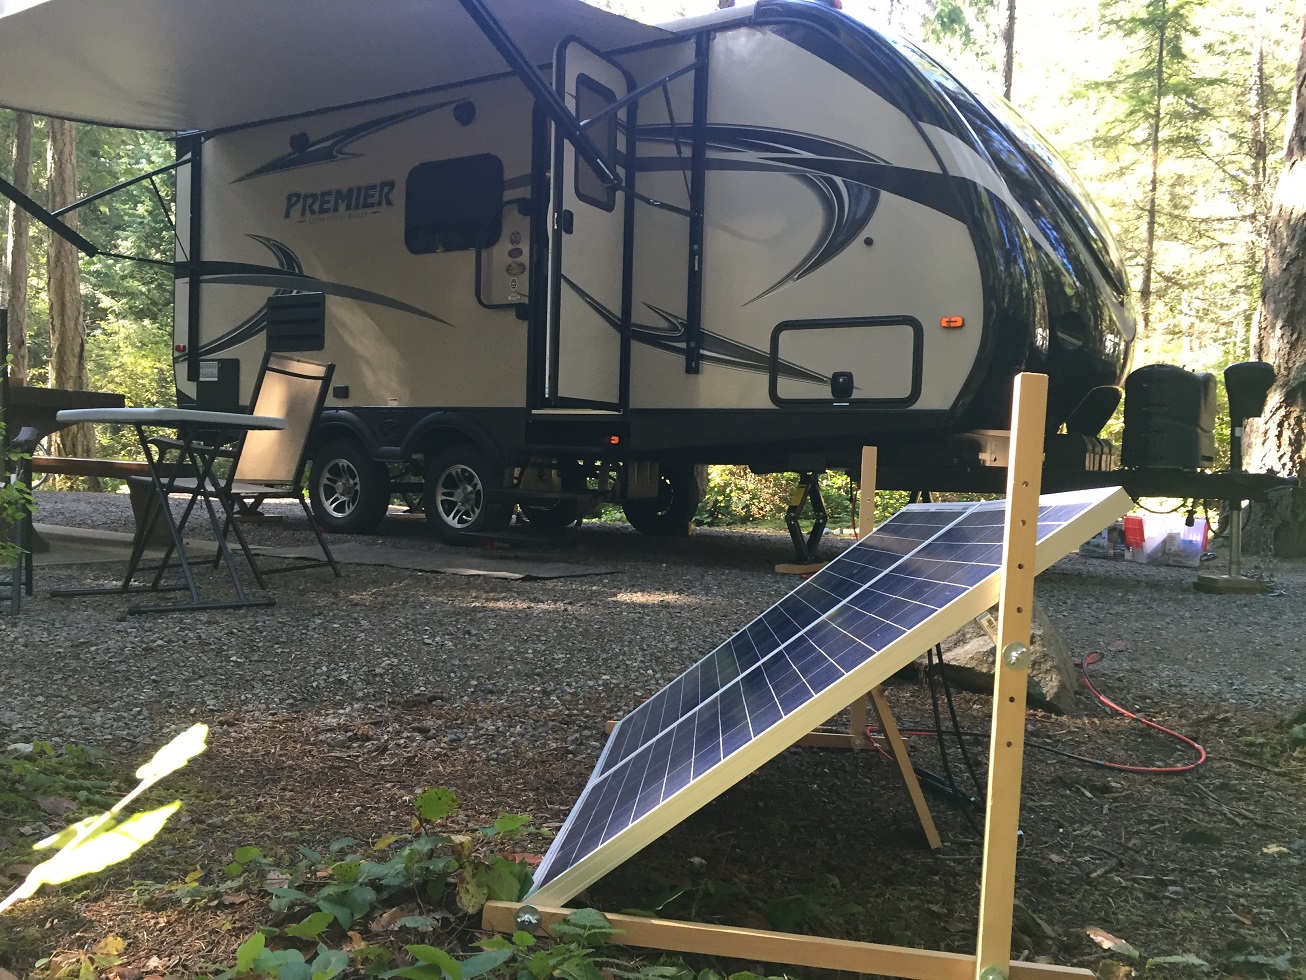 Installing a Solar Charging System/Inverter in a Travel Trailer